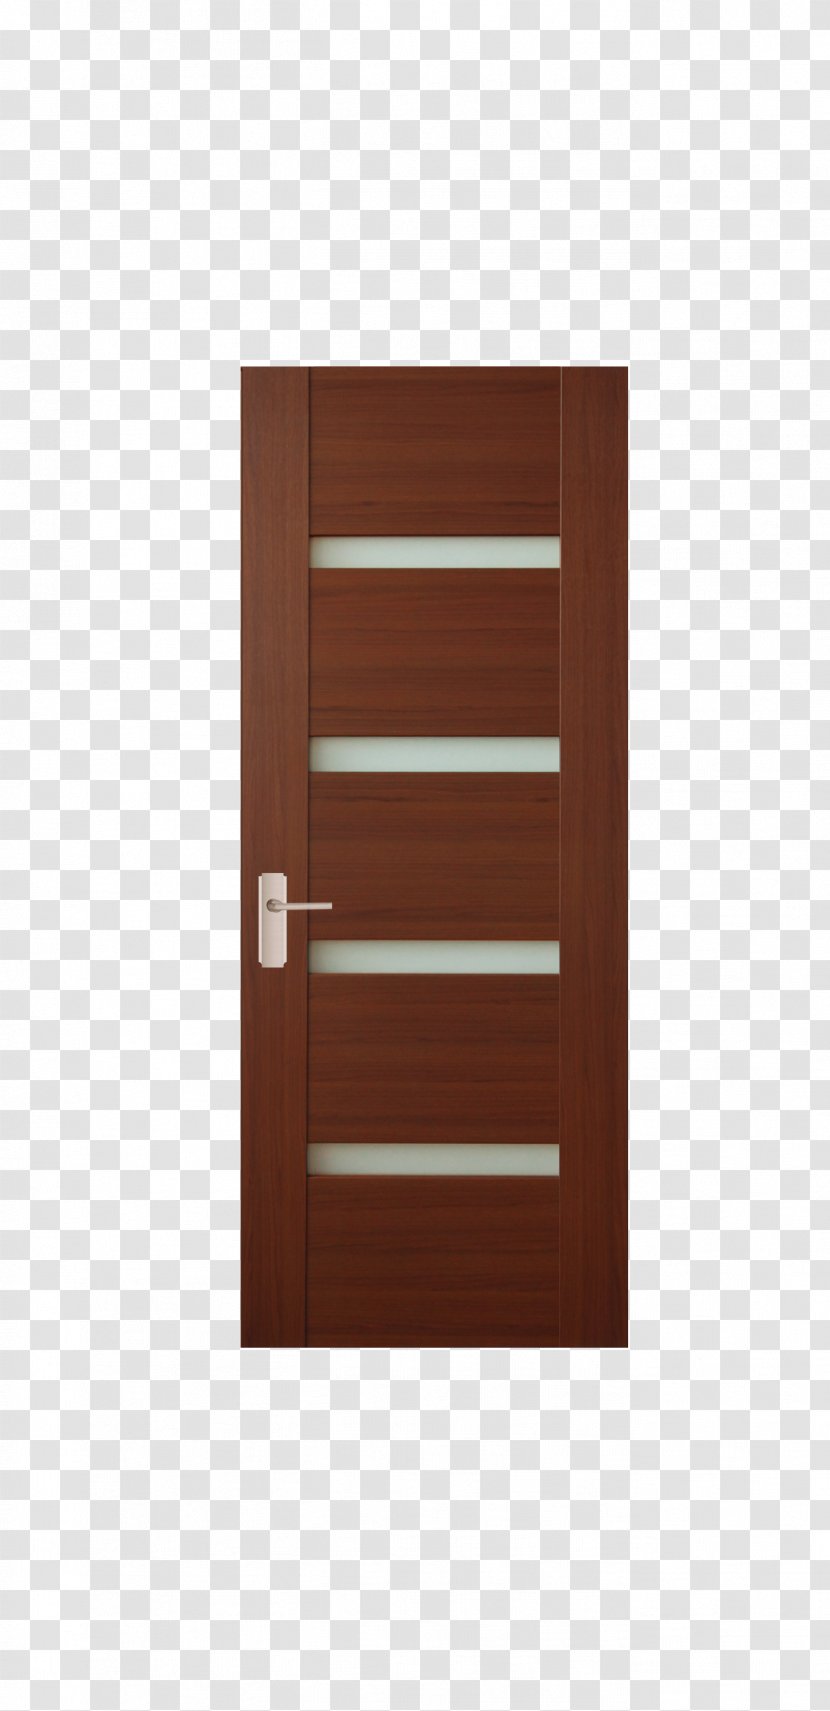 Wood Door Building Material - Architectural Engineering Transparent PNG